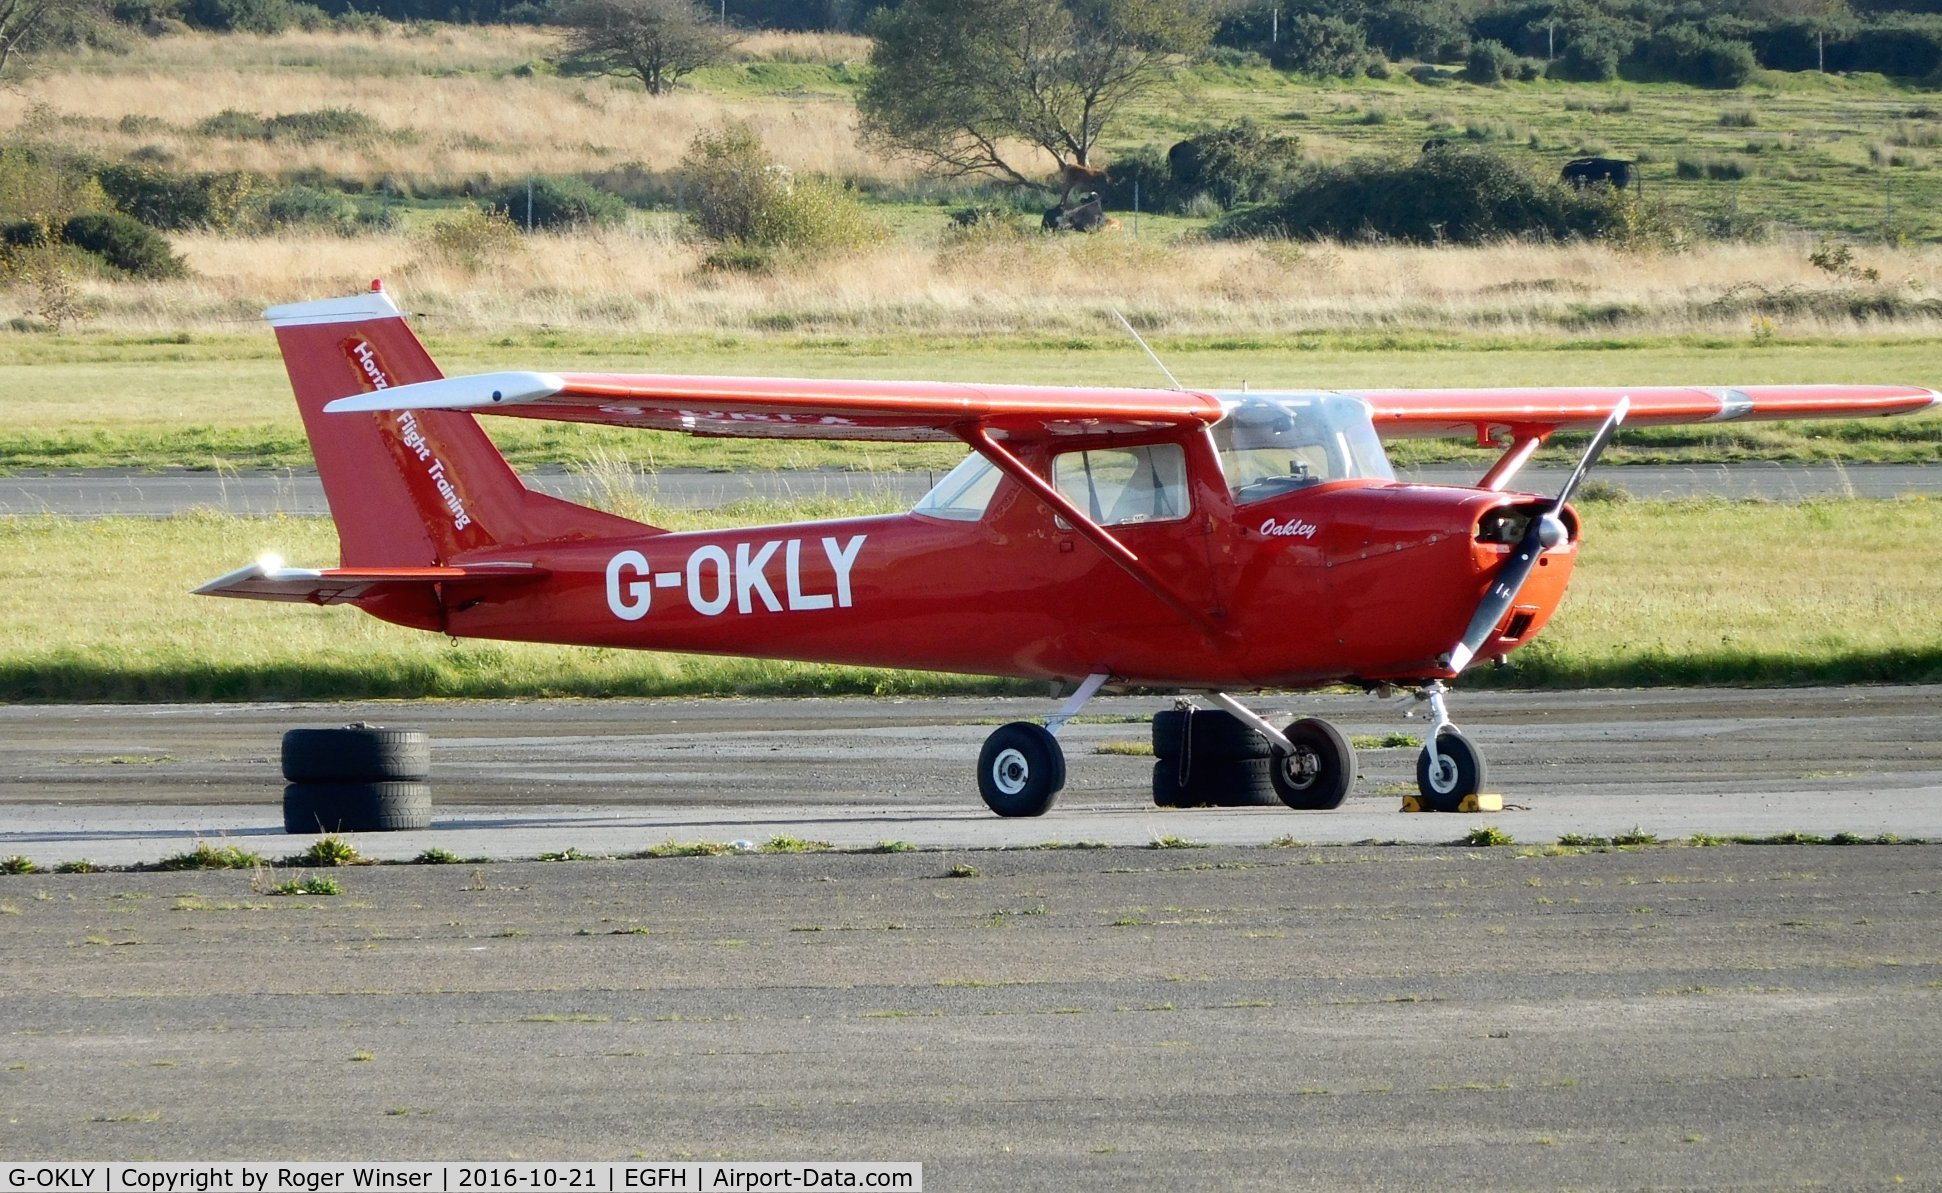 G-OKLY, 1970 Reims F150K C/N 0577, Visiting Reims Cessna F150K operated by Horizon Flight Training. Previously registered G-ECBH when based at Swansea Airport.